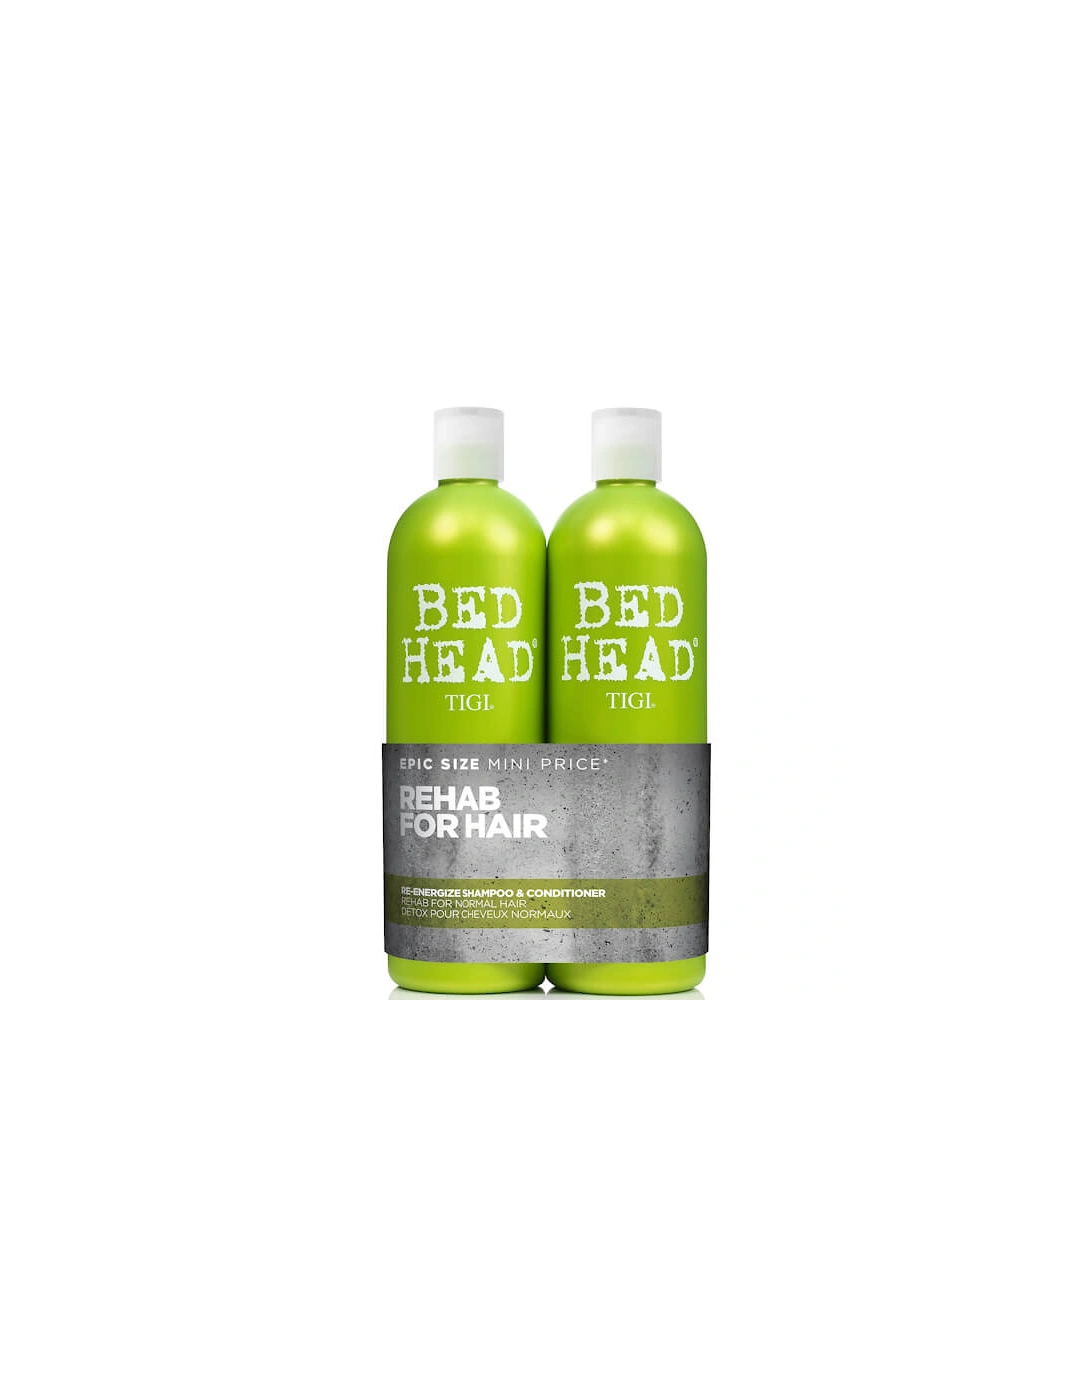 Bed Head Urban Antidotes Re-energize Daily Shampoo and Conditioner for Normal Hair 2 x 750ml, 2 of 1